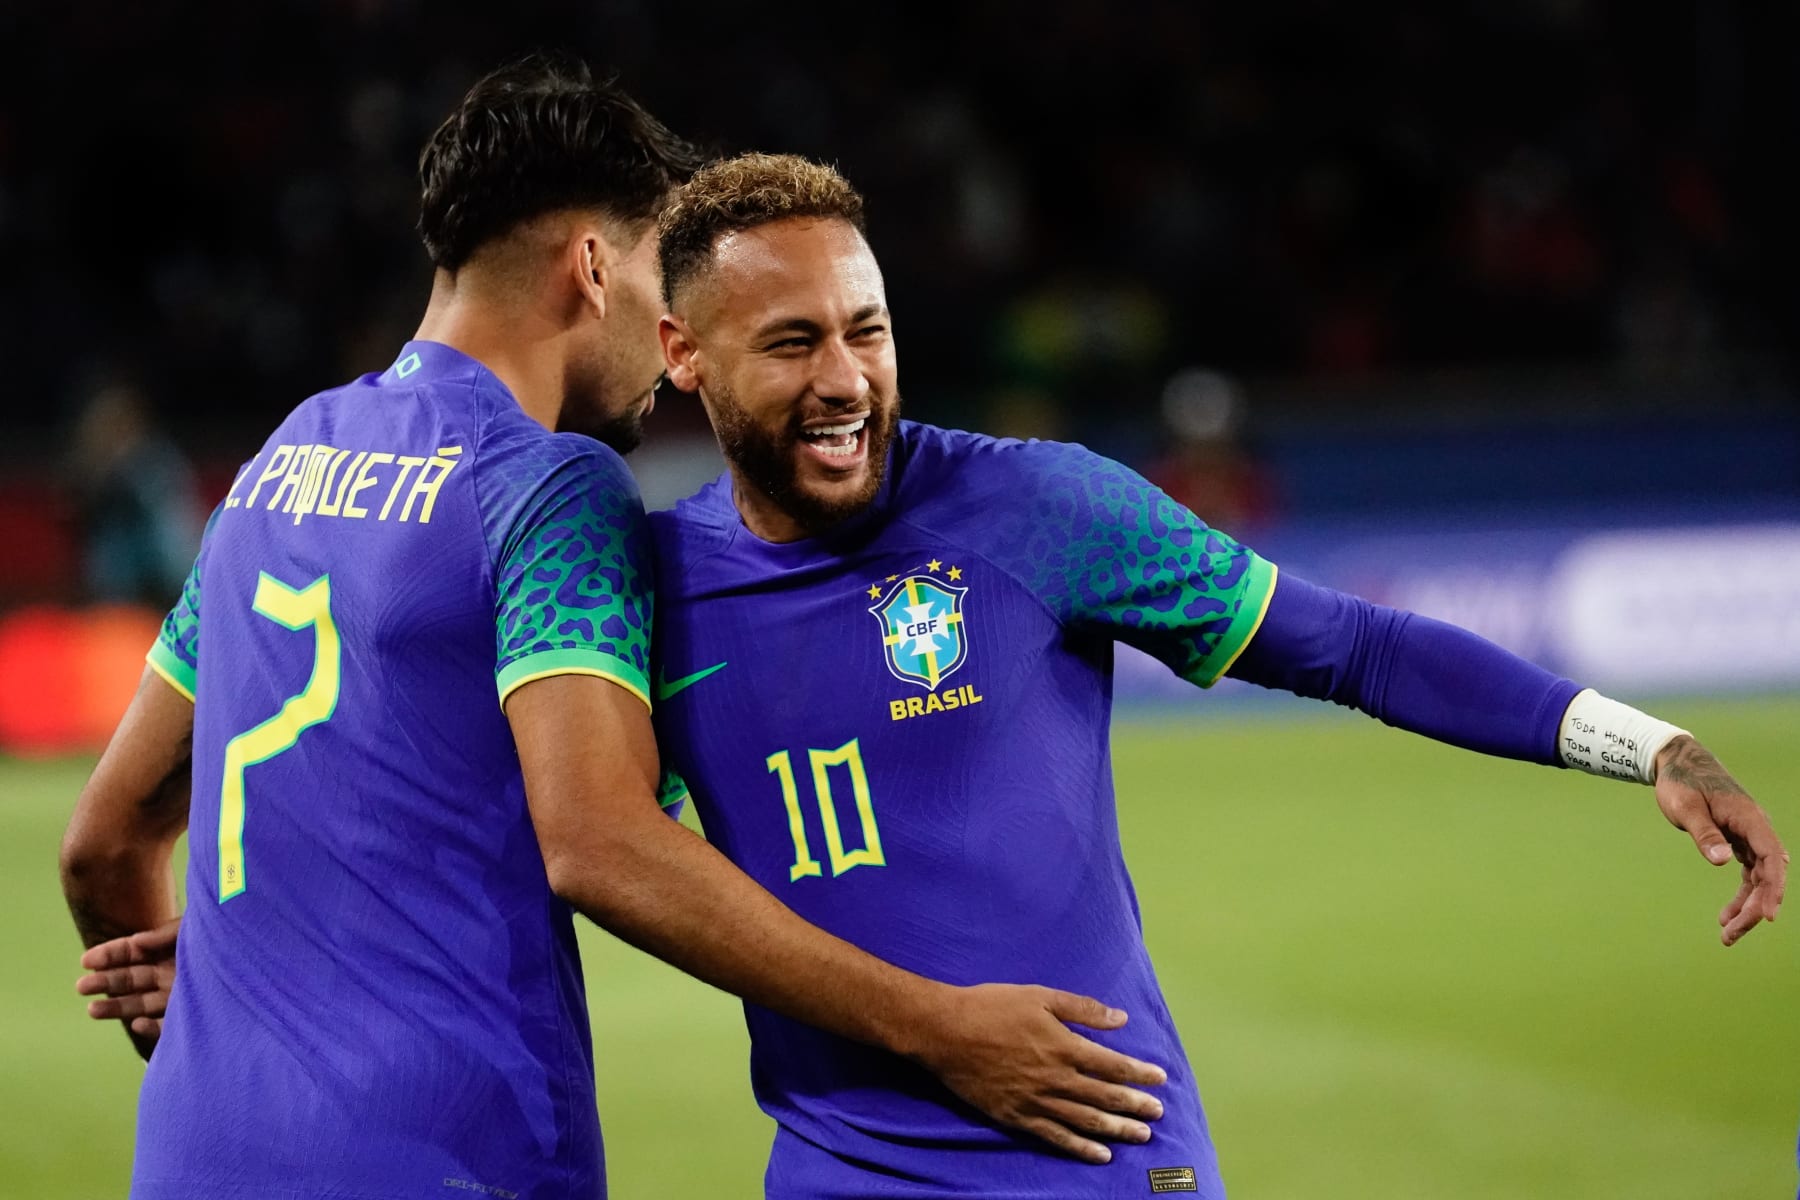 Ranking the Top 10 Players at the 2022 World Cup